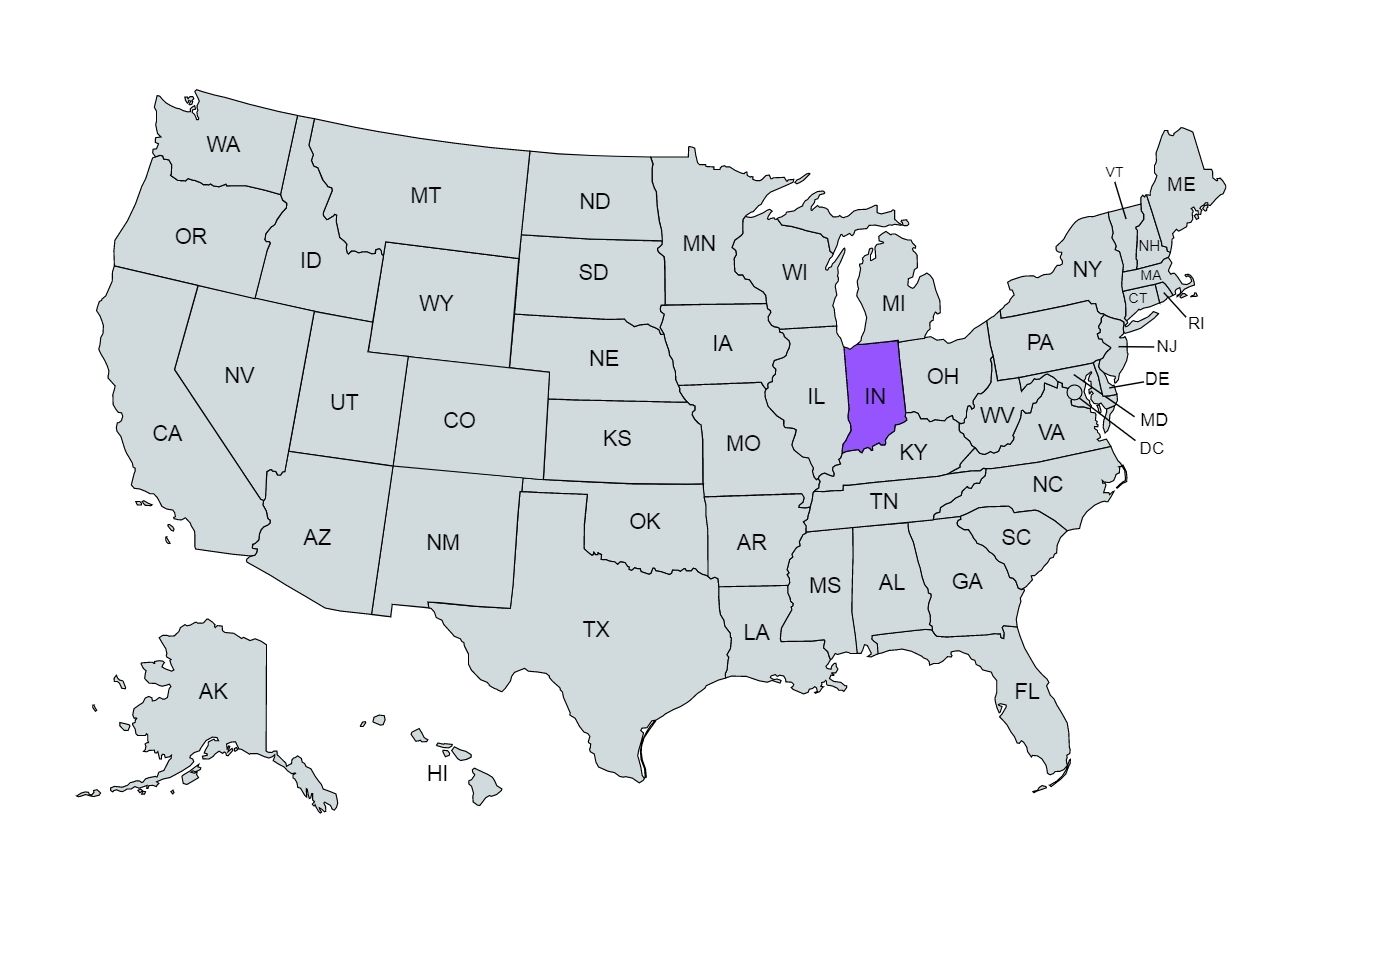 The US map with the Indiana state marked in purple